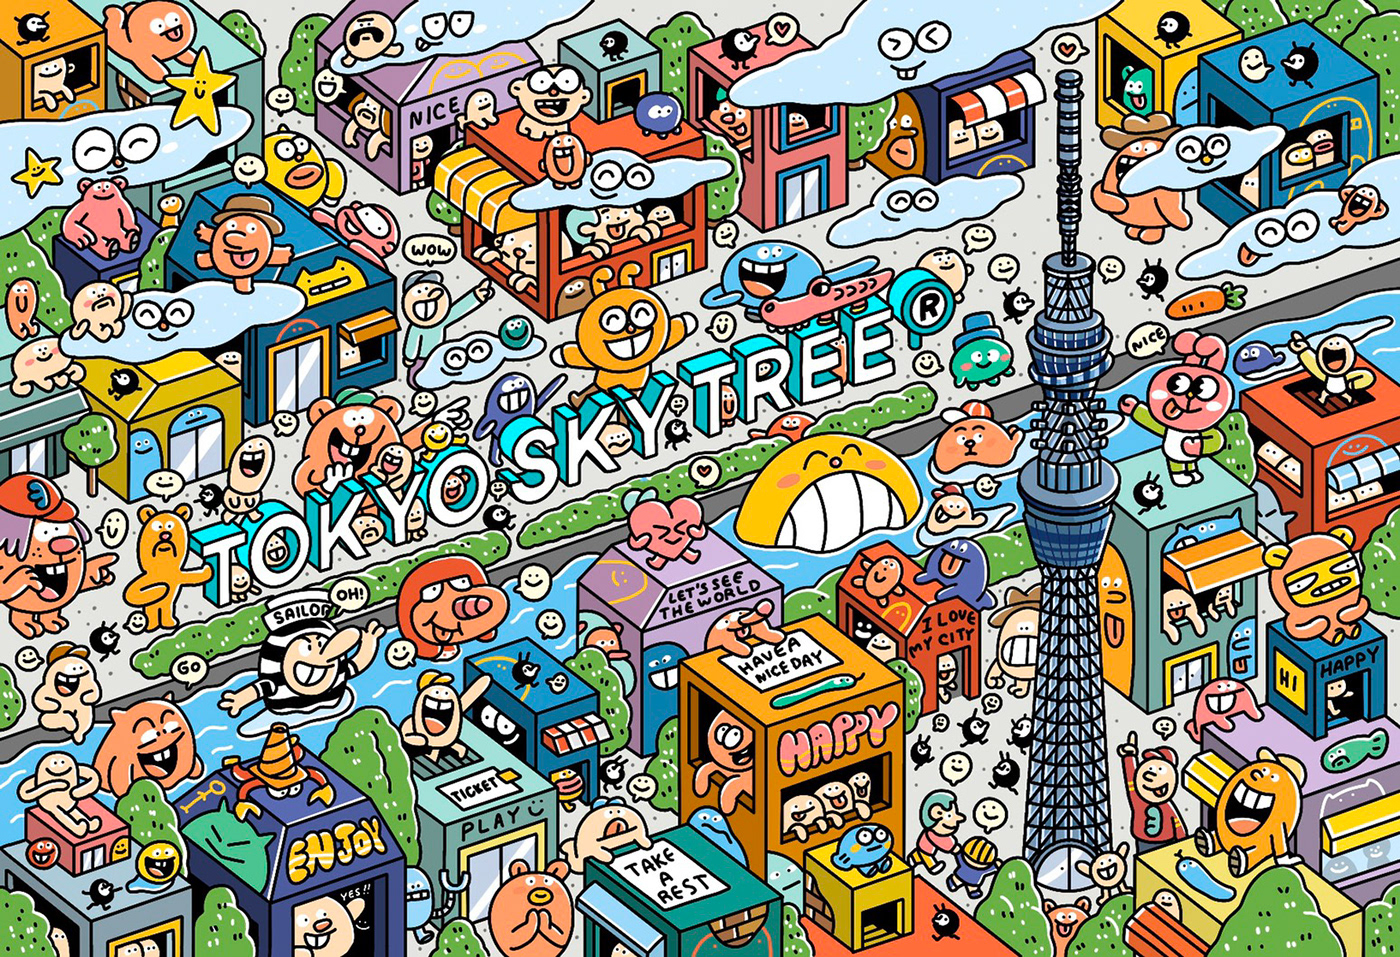 Skytree tokyo art 3Land Fun characters map town ILLUSTRATION  city